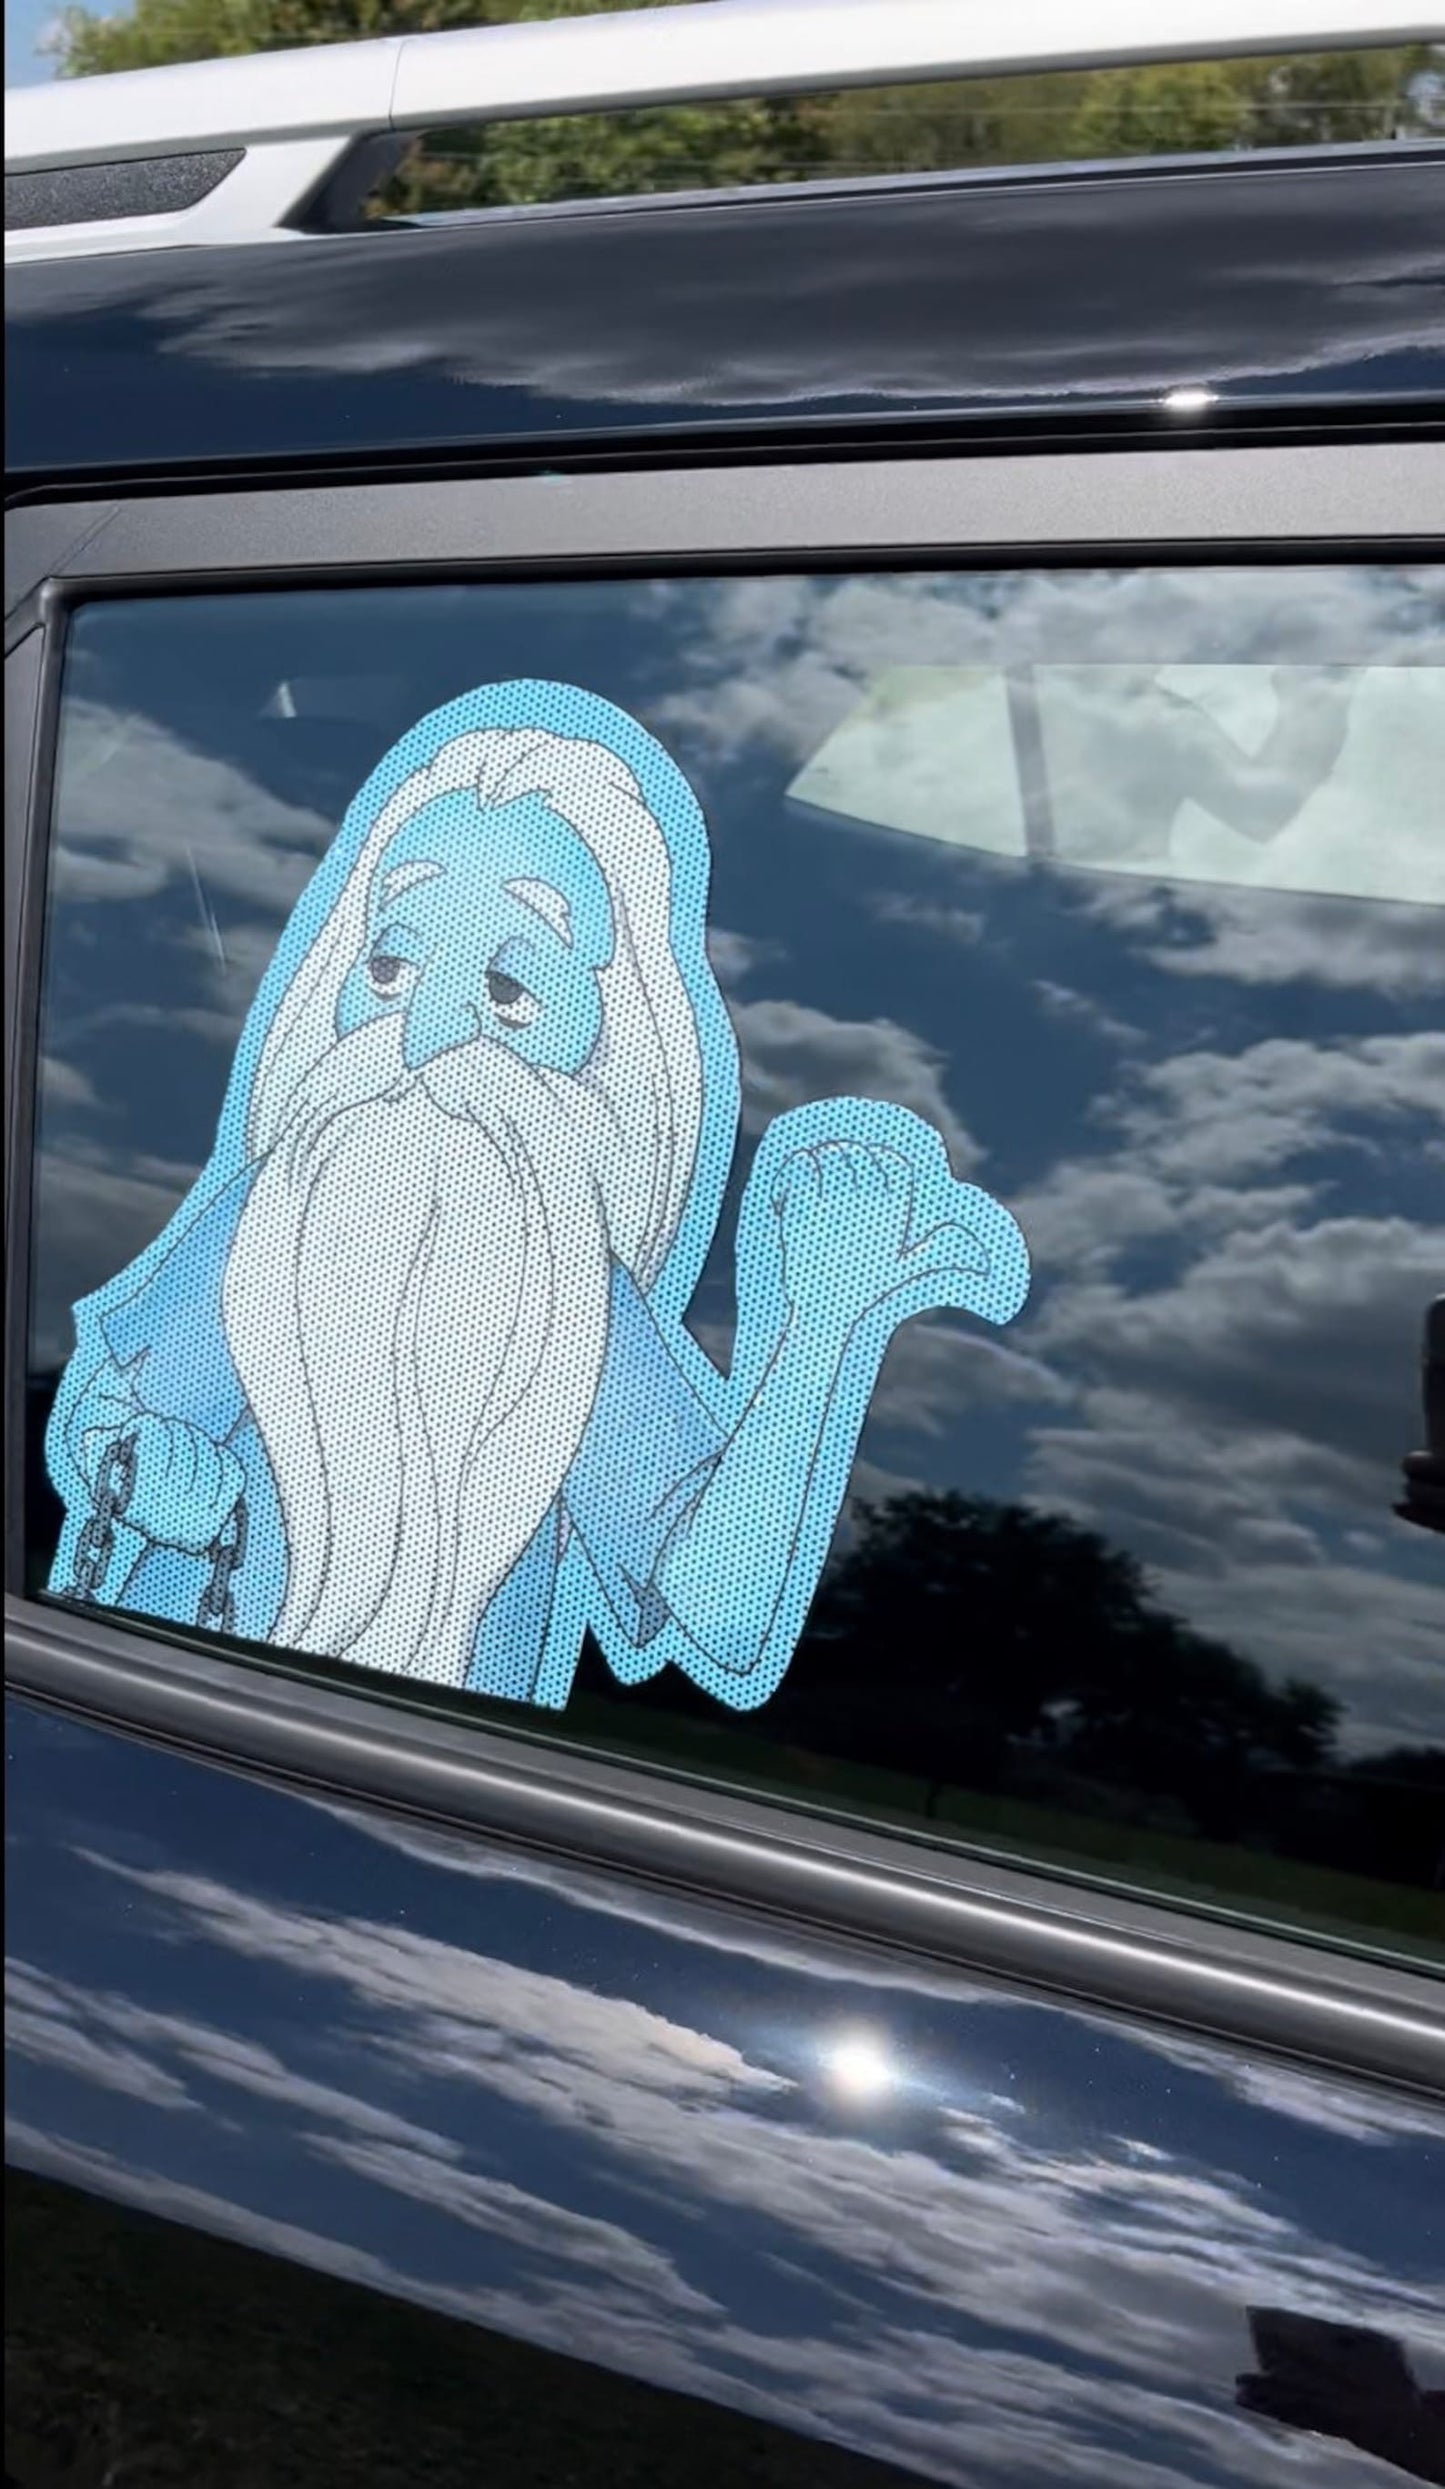 Hitchhiking ghost window clings